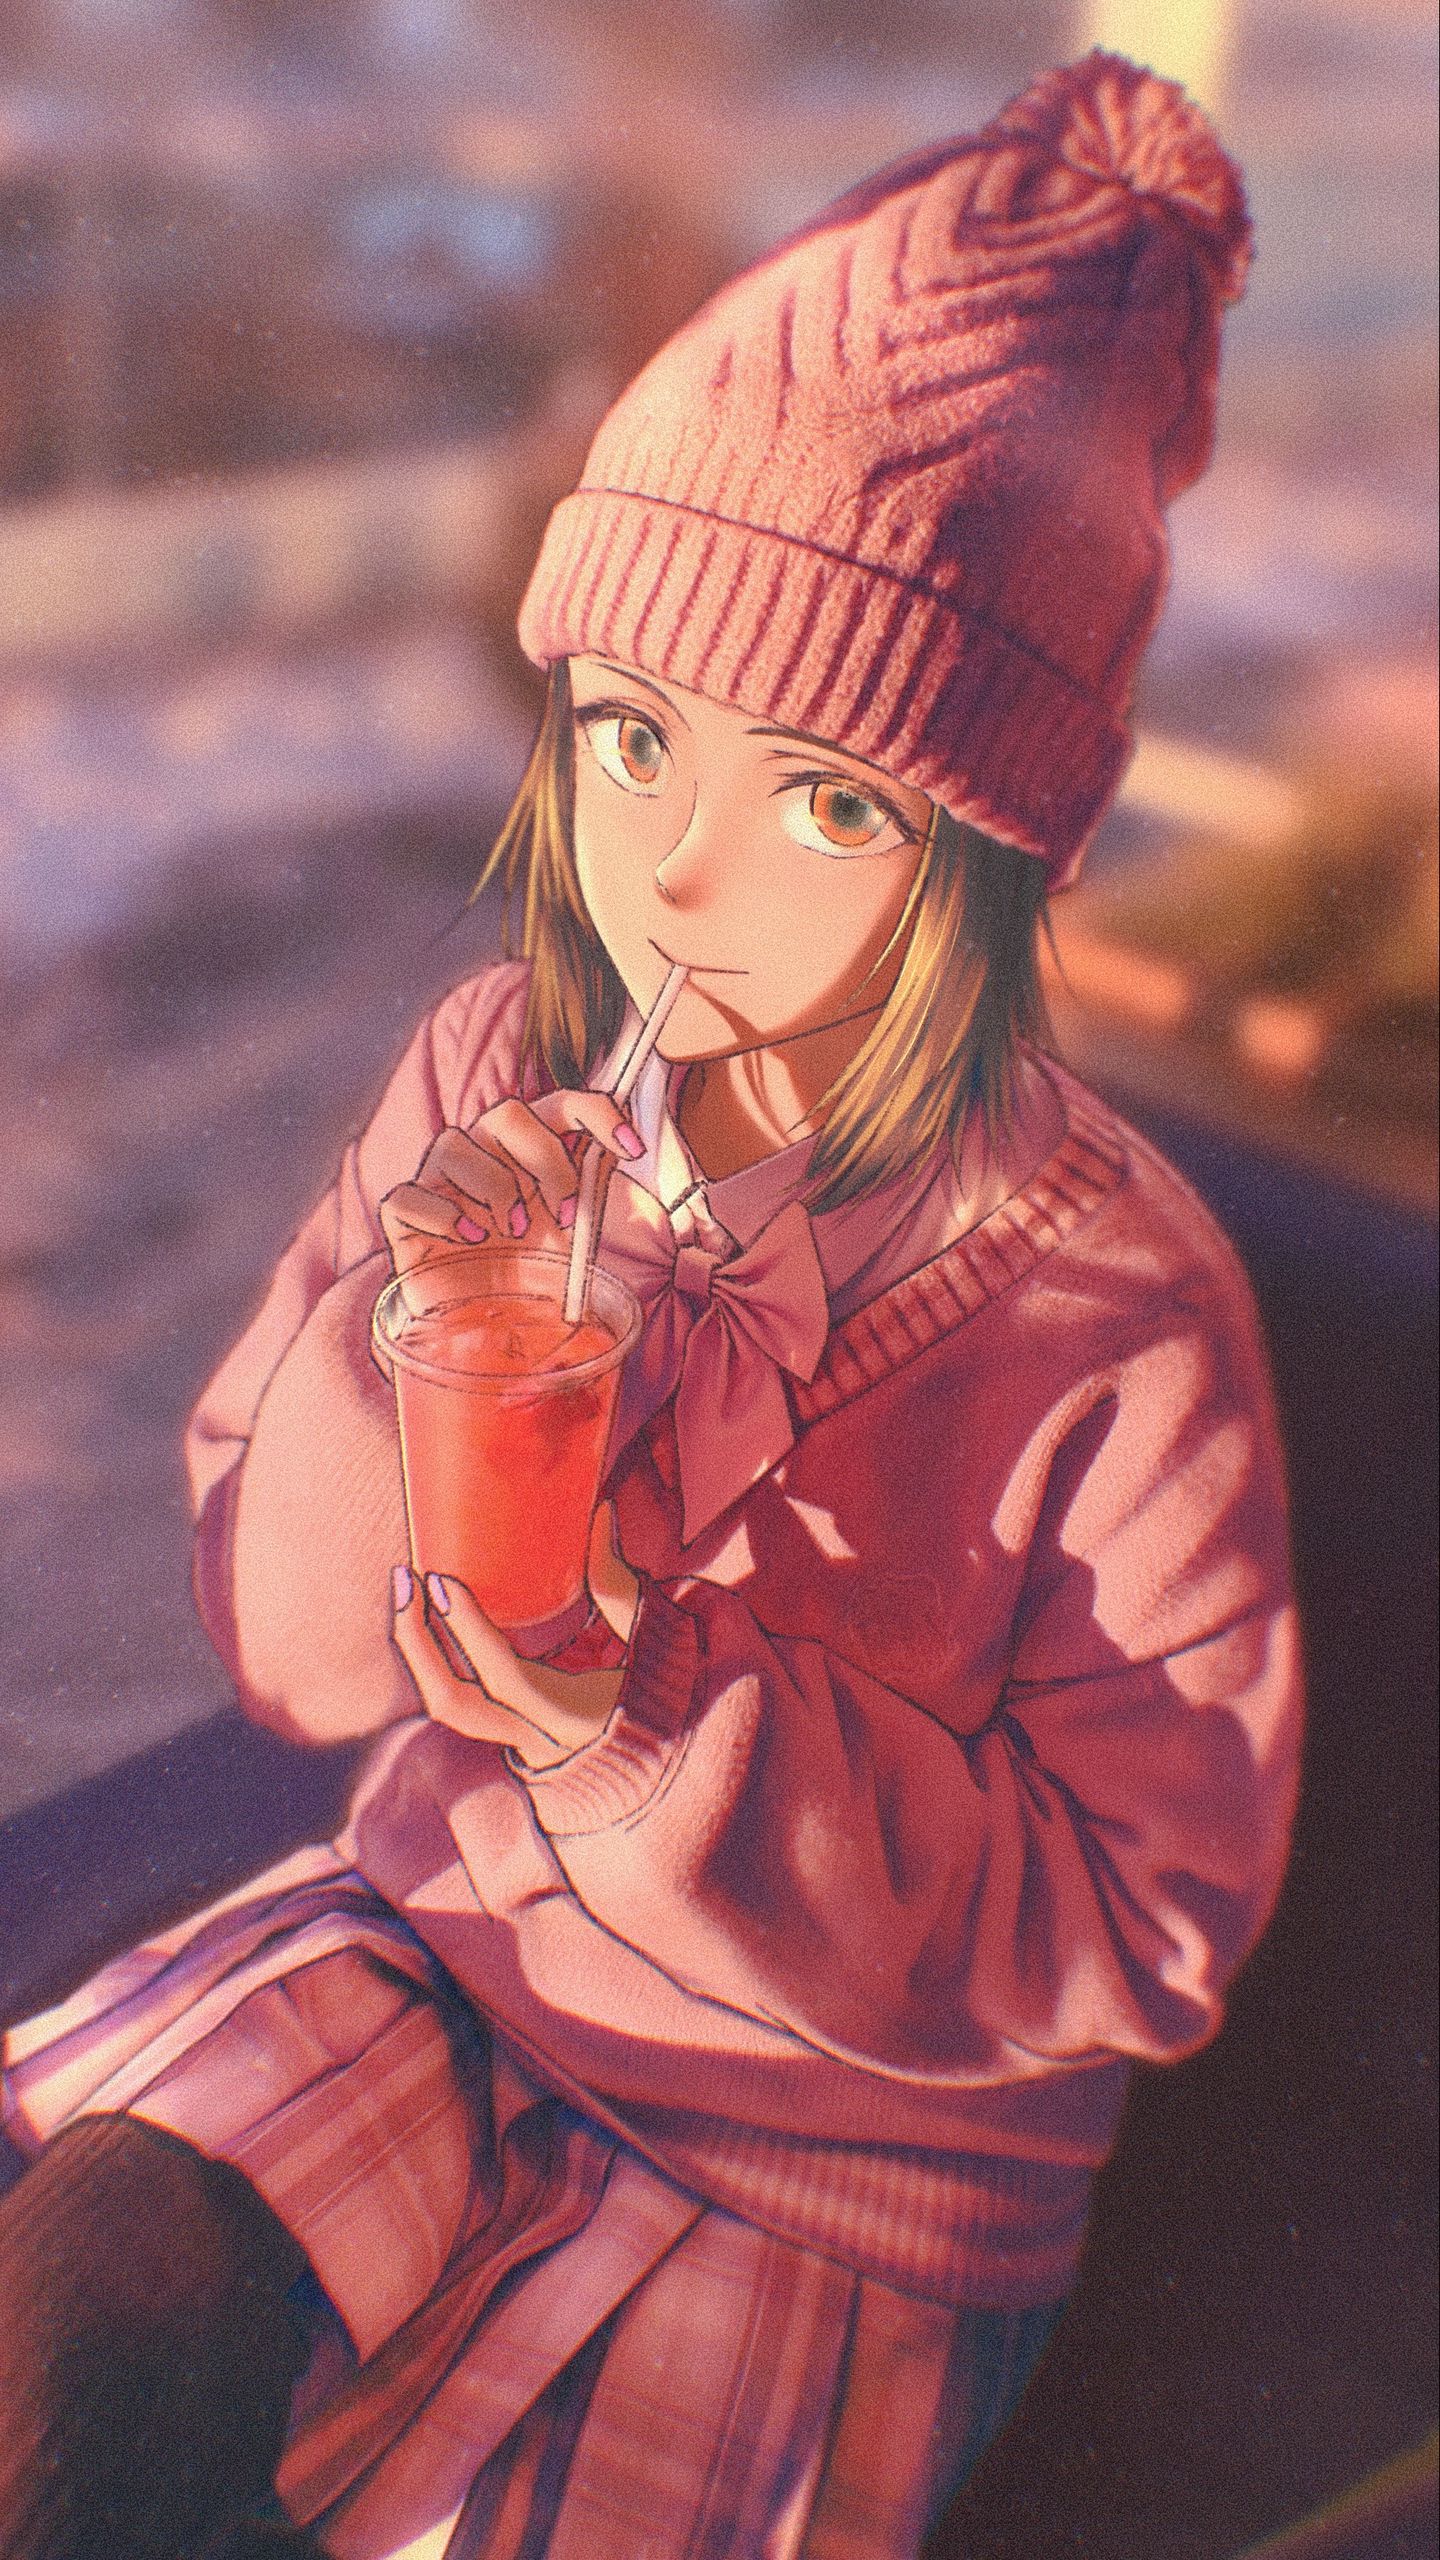 Download wallpaper 1440x2560 girl, cocktail, anime, glance, cute qhd ...